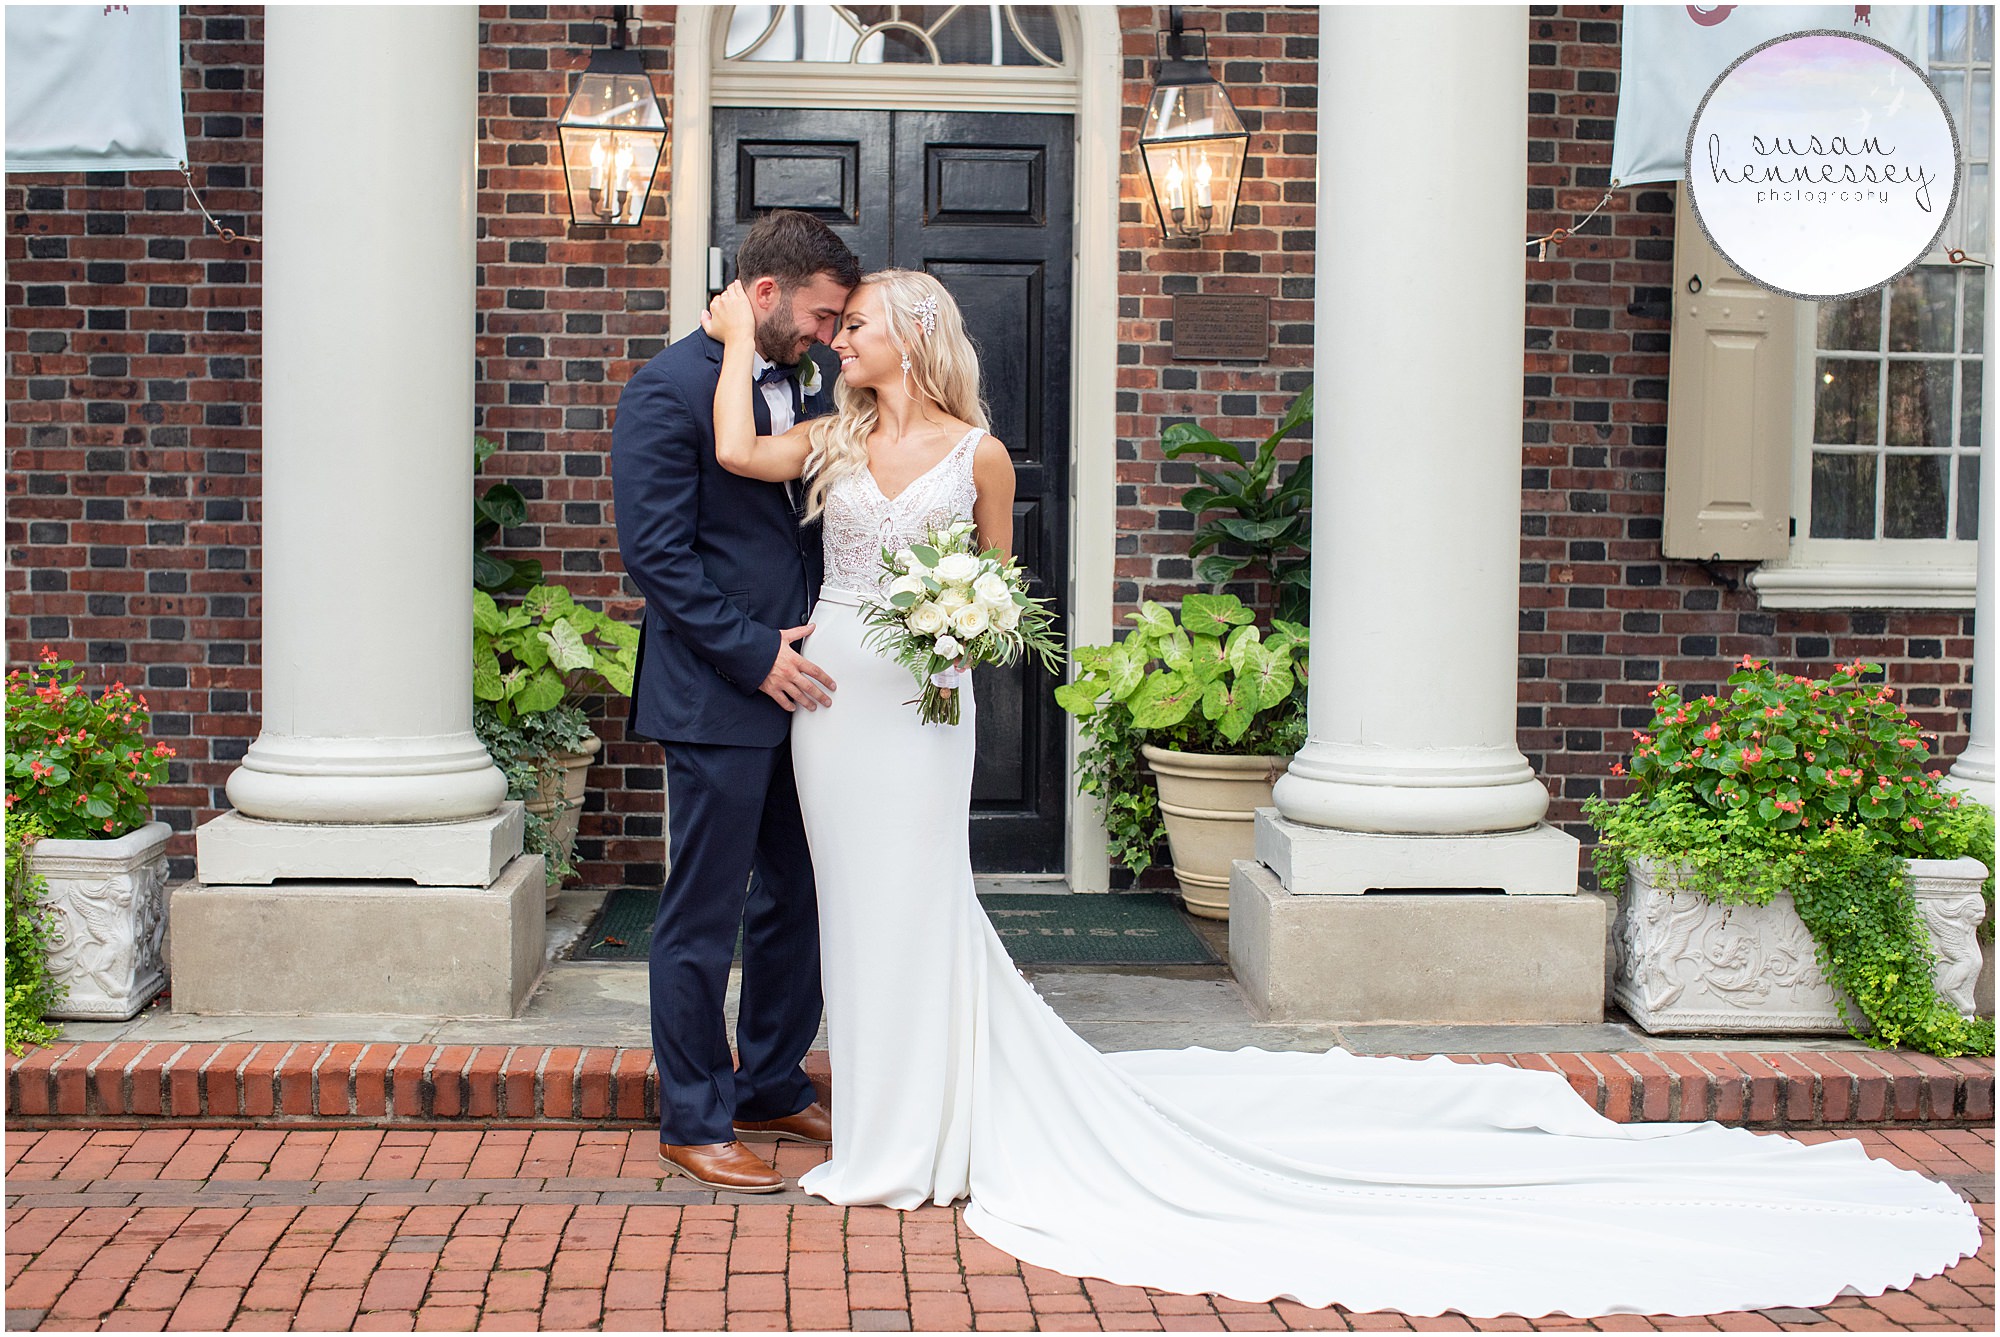 Romantic couple portraits at Philly wedding